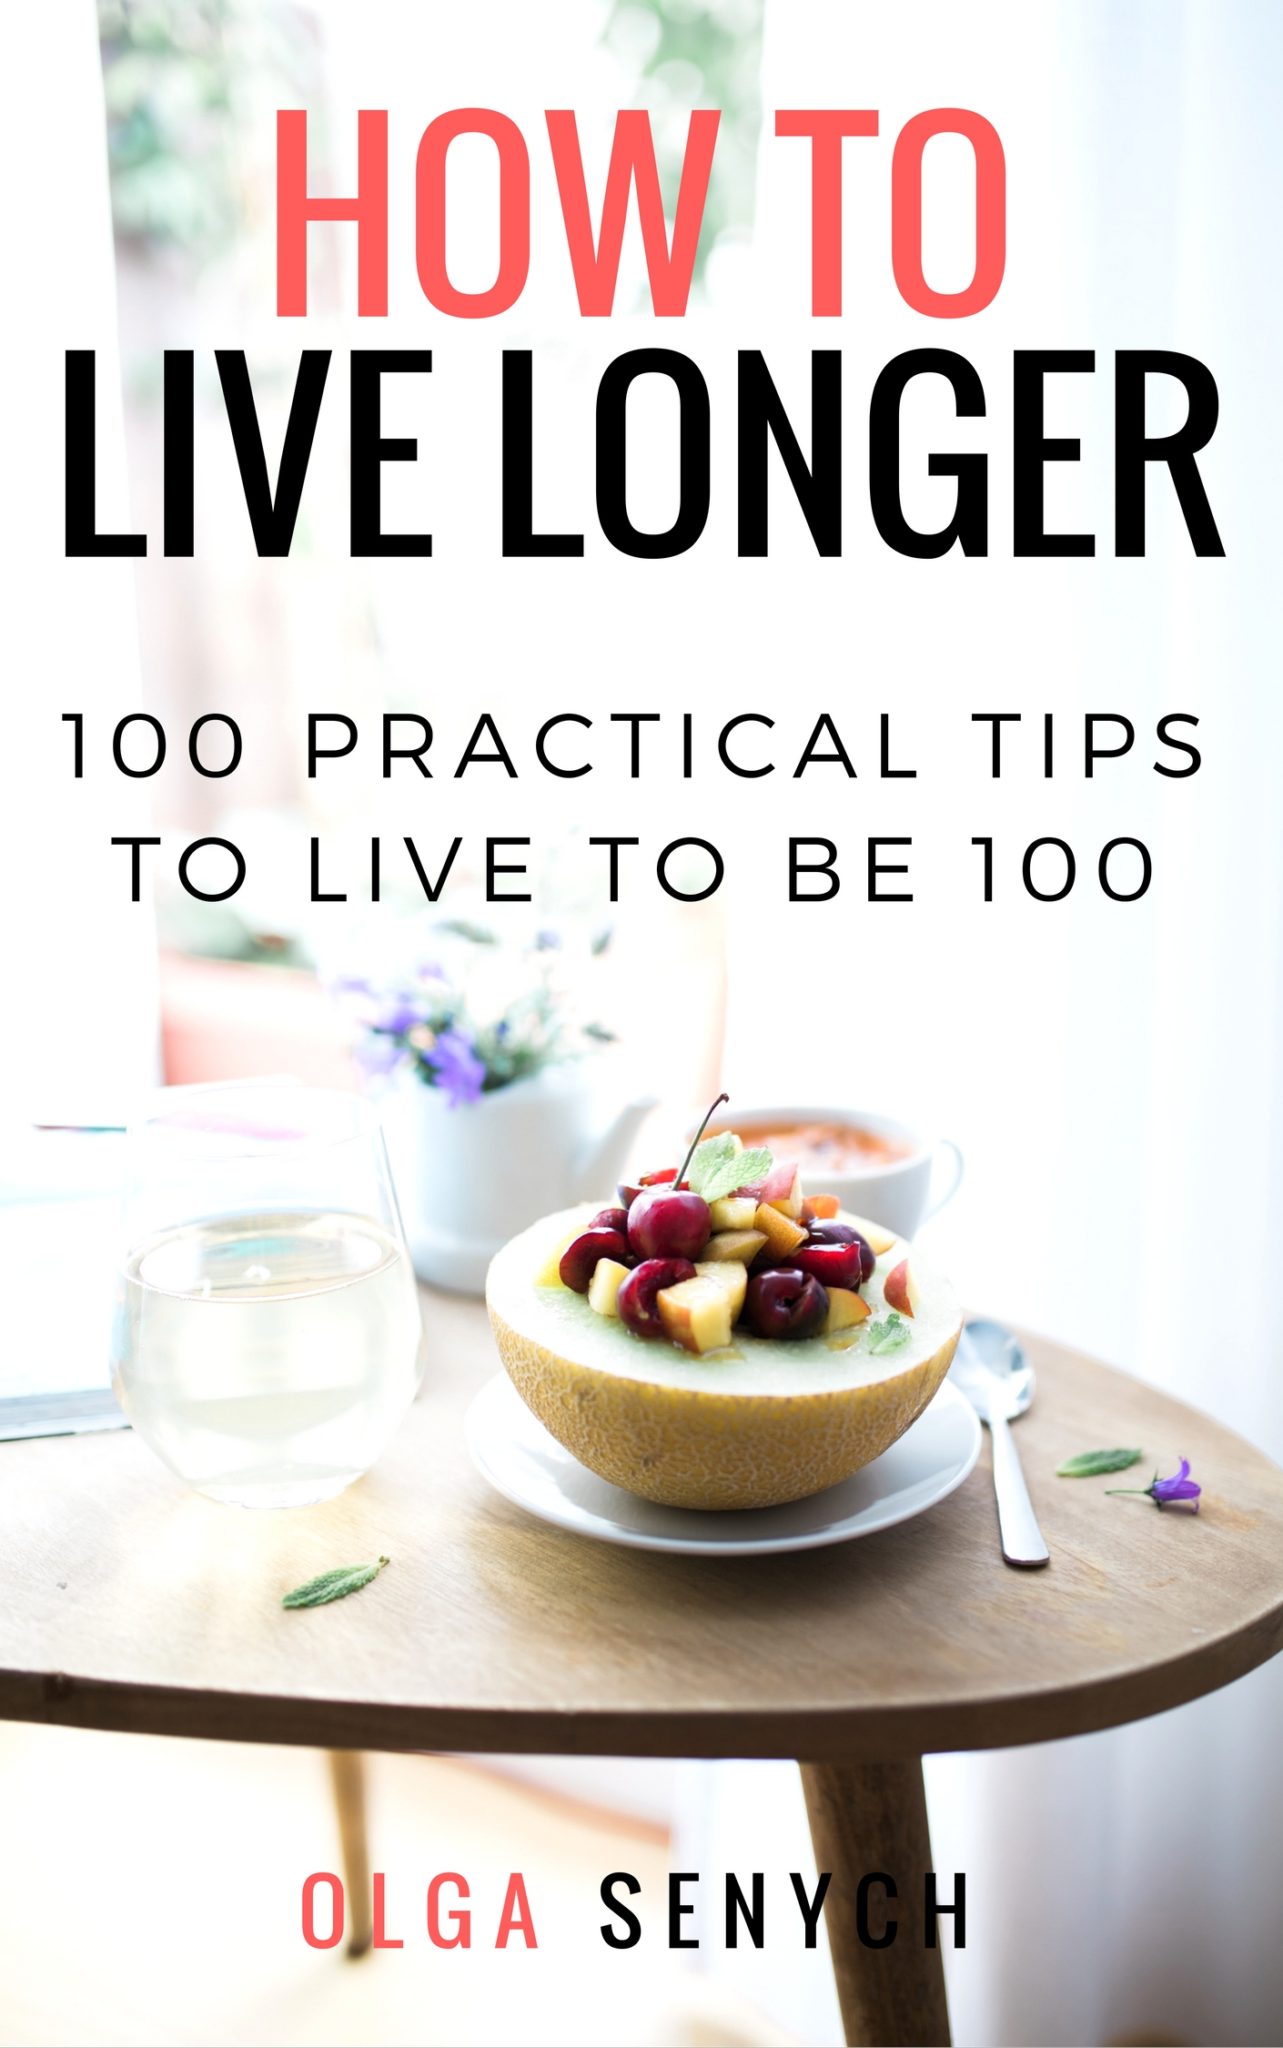 FREE: How to Live Longer: 100 Practical Tips to Live to Be 100 by Olga Senych